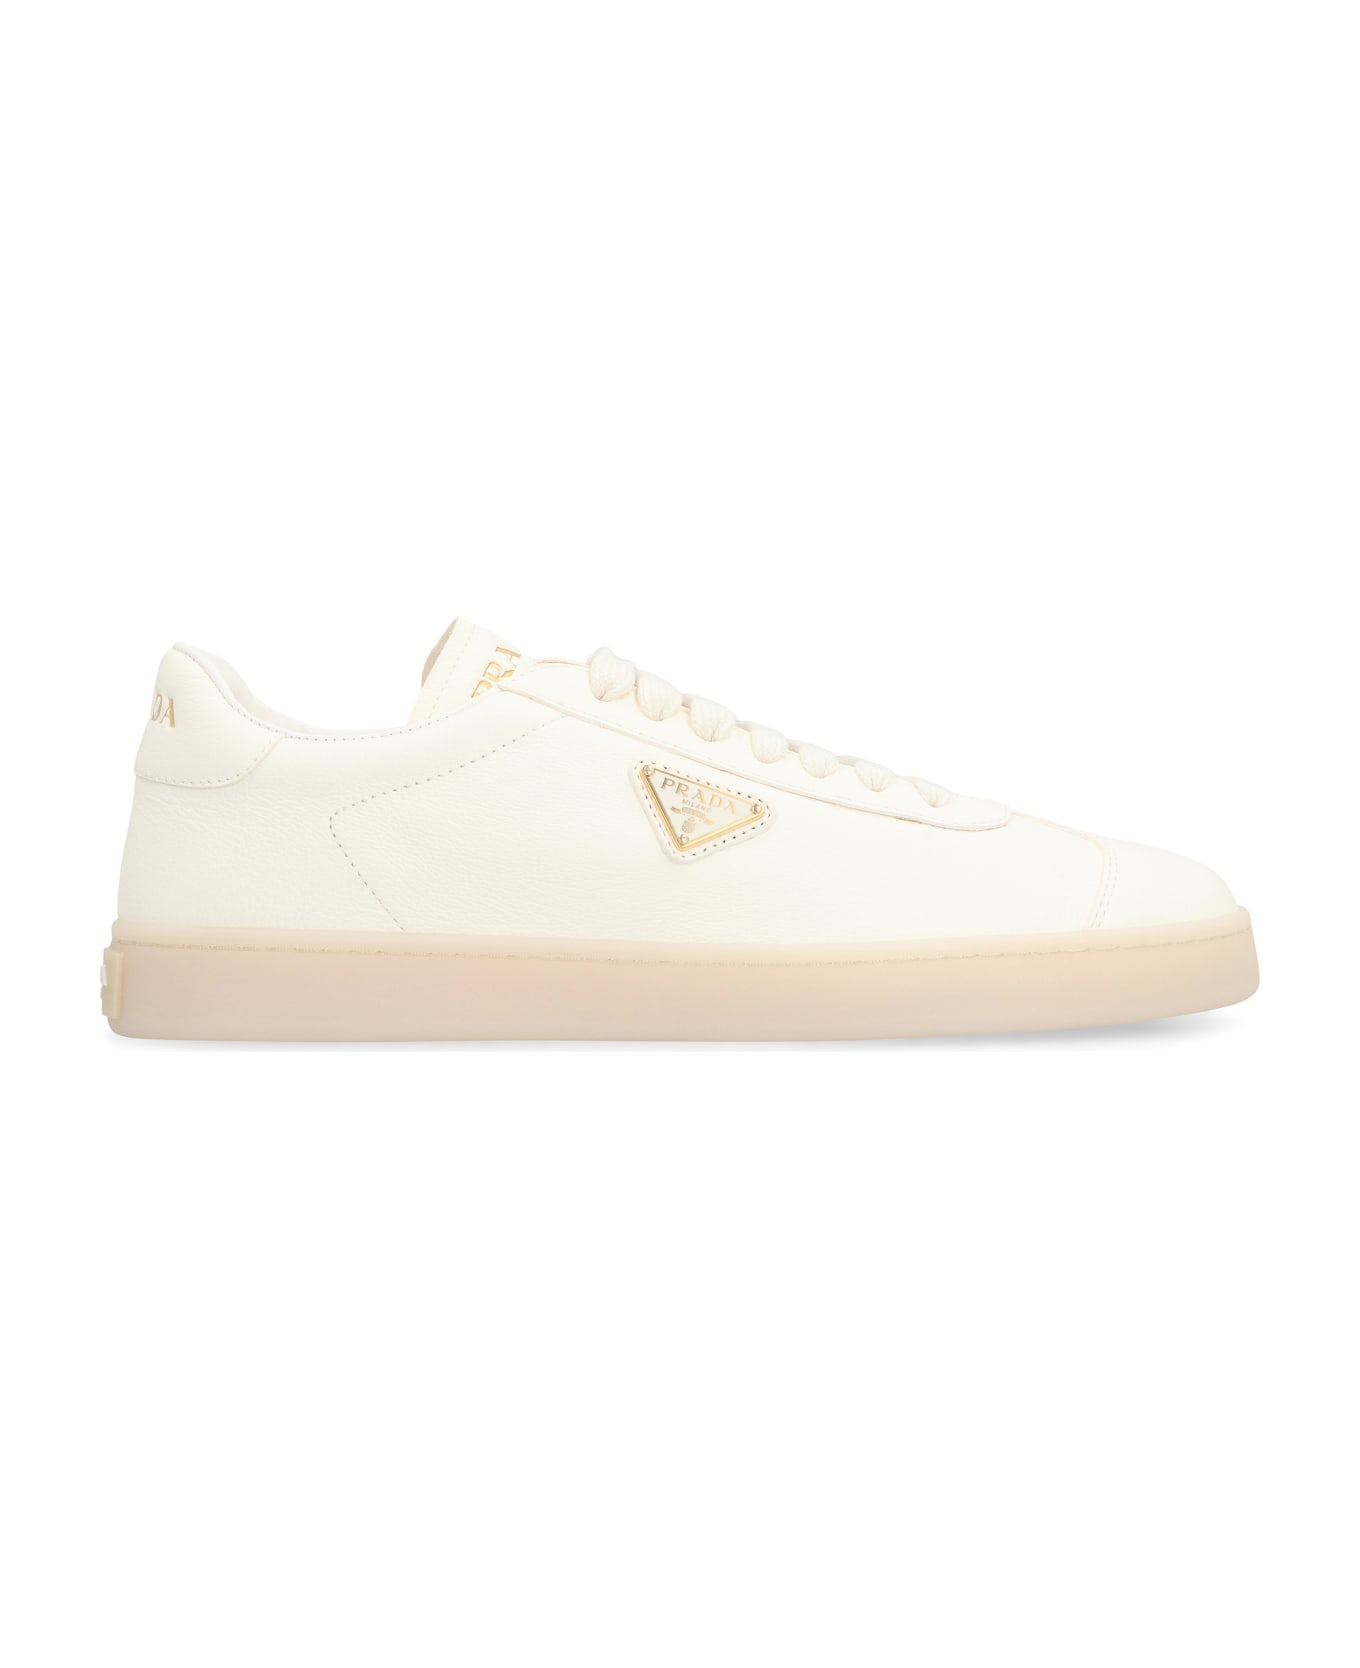 Prada Leather Low-top Sneakers - Ivory